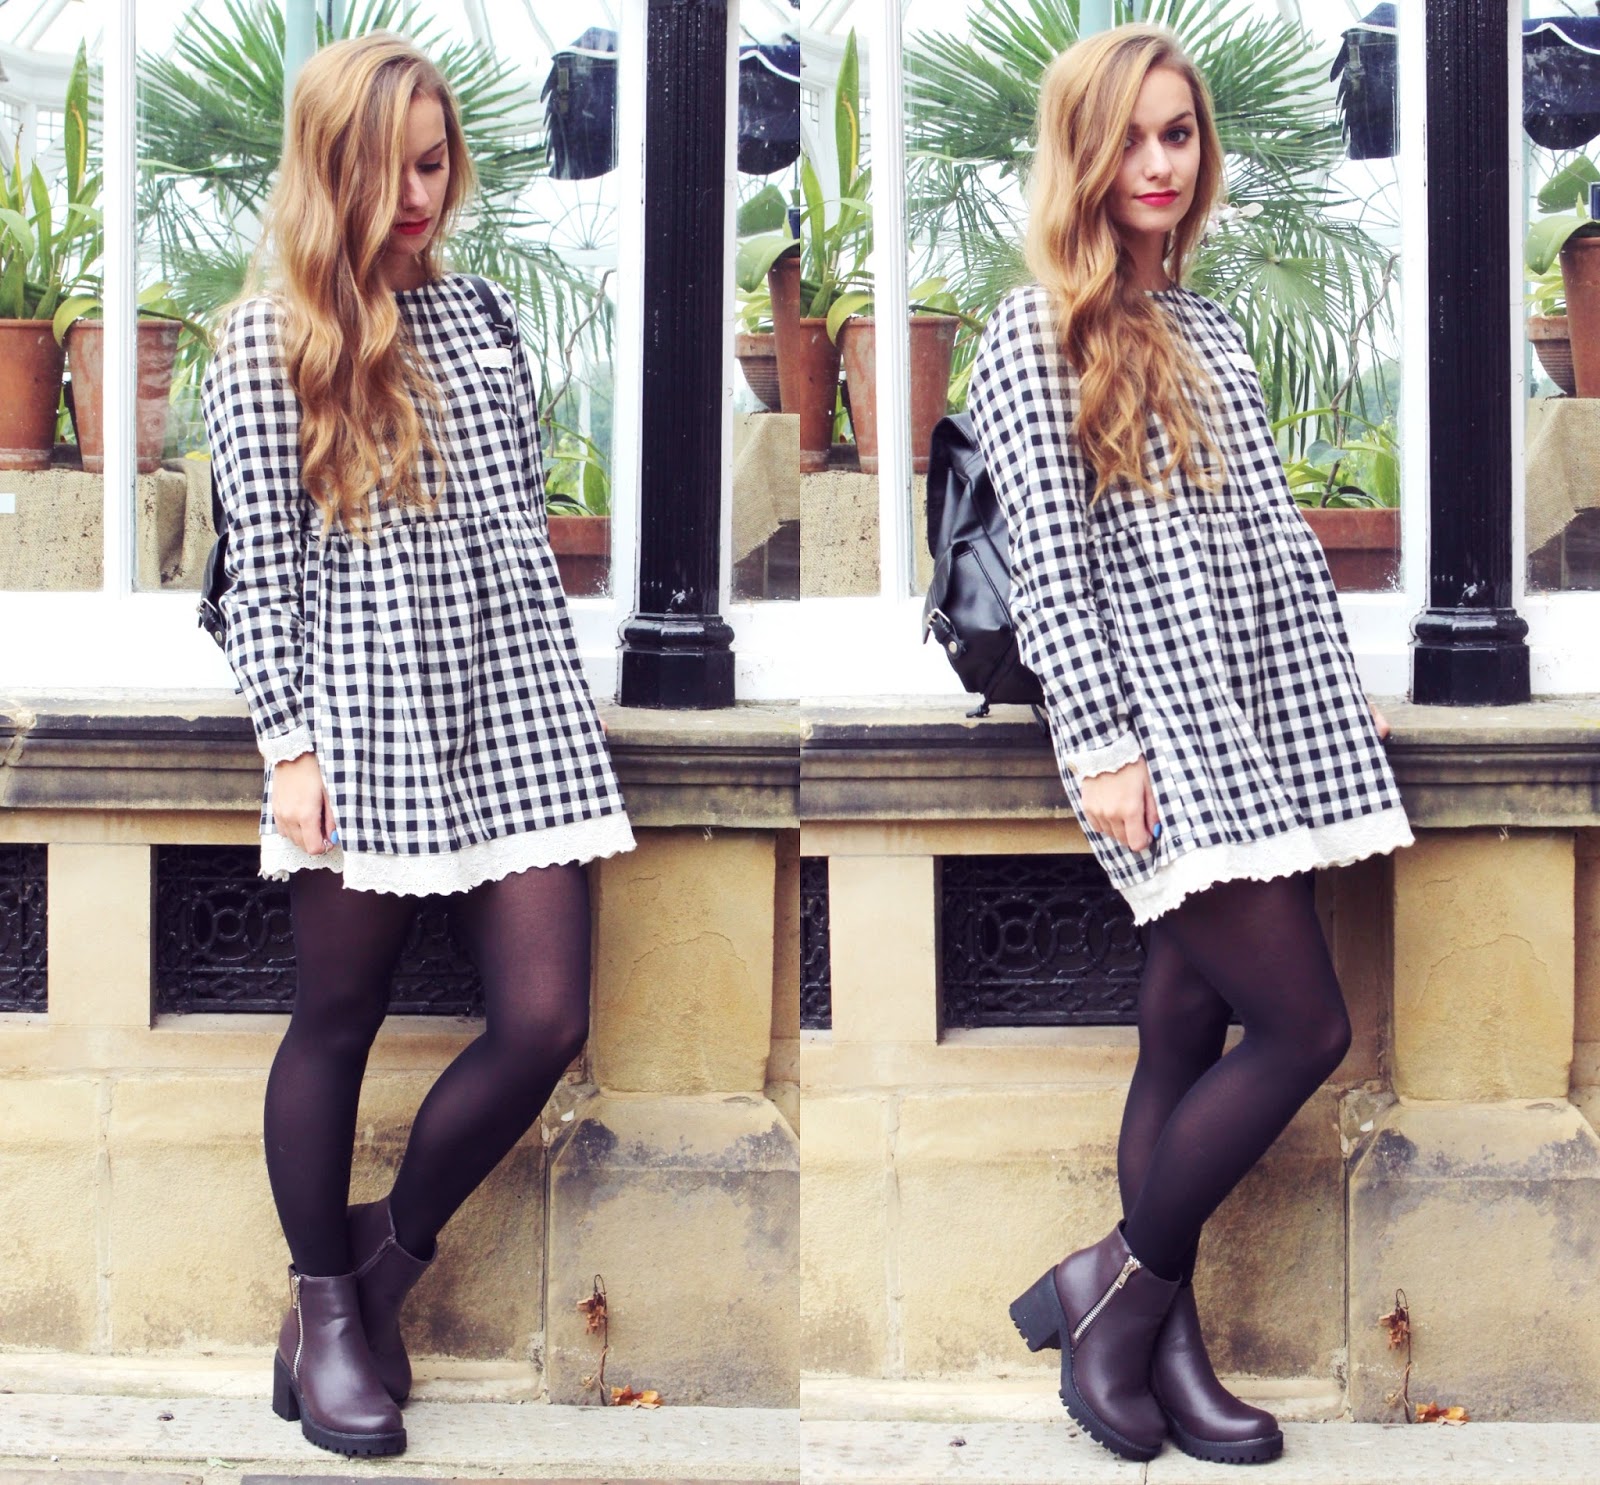 OOTD | New Look Burgundy Boots - Thumbelina Lillie